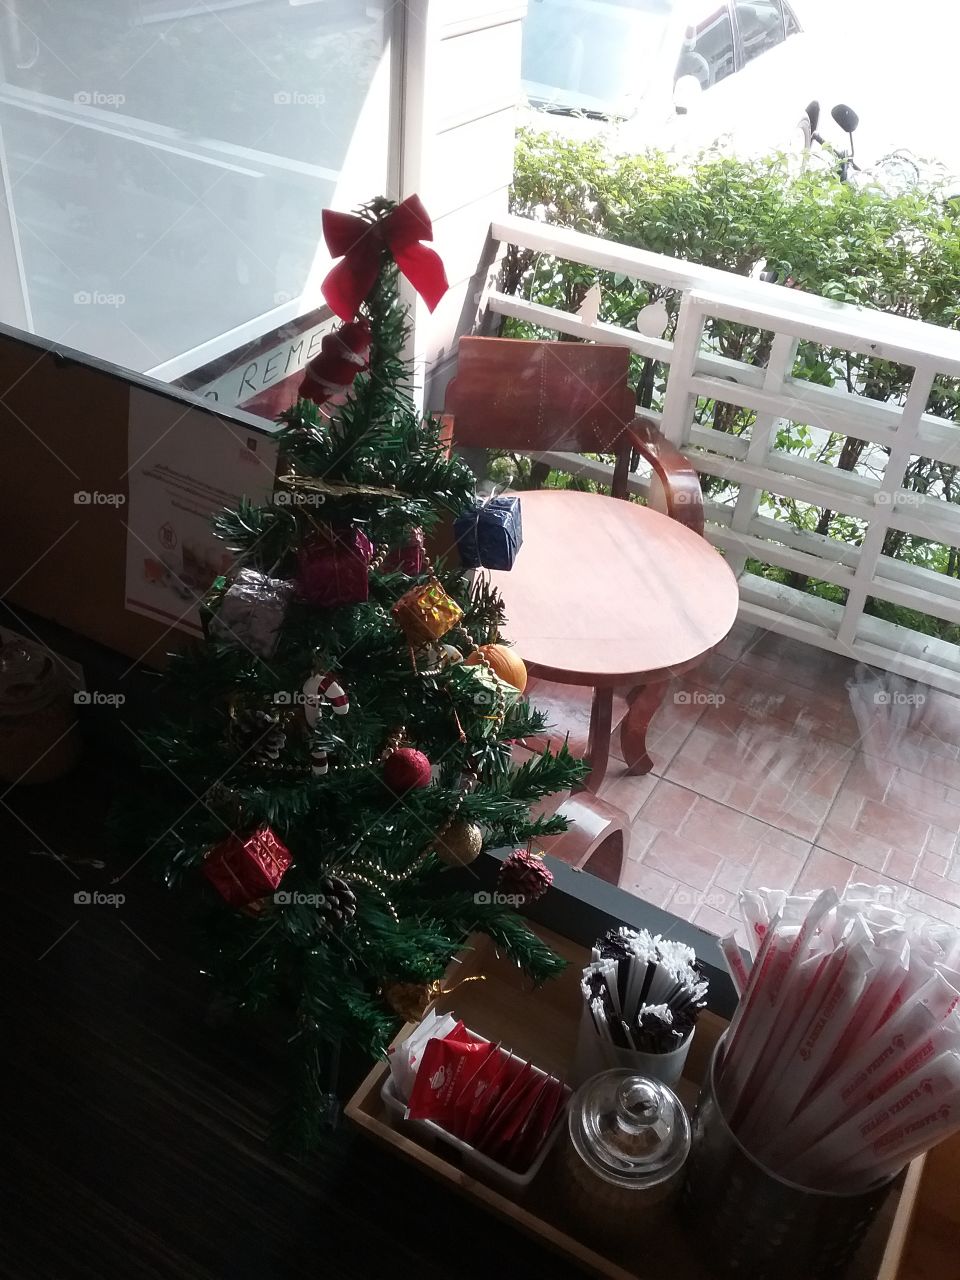 A coffee shop in Bangkok always has a small Christmas tree for you to look at everyday. Let's smile every day.